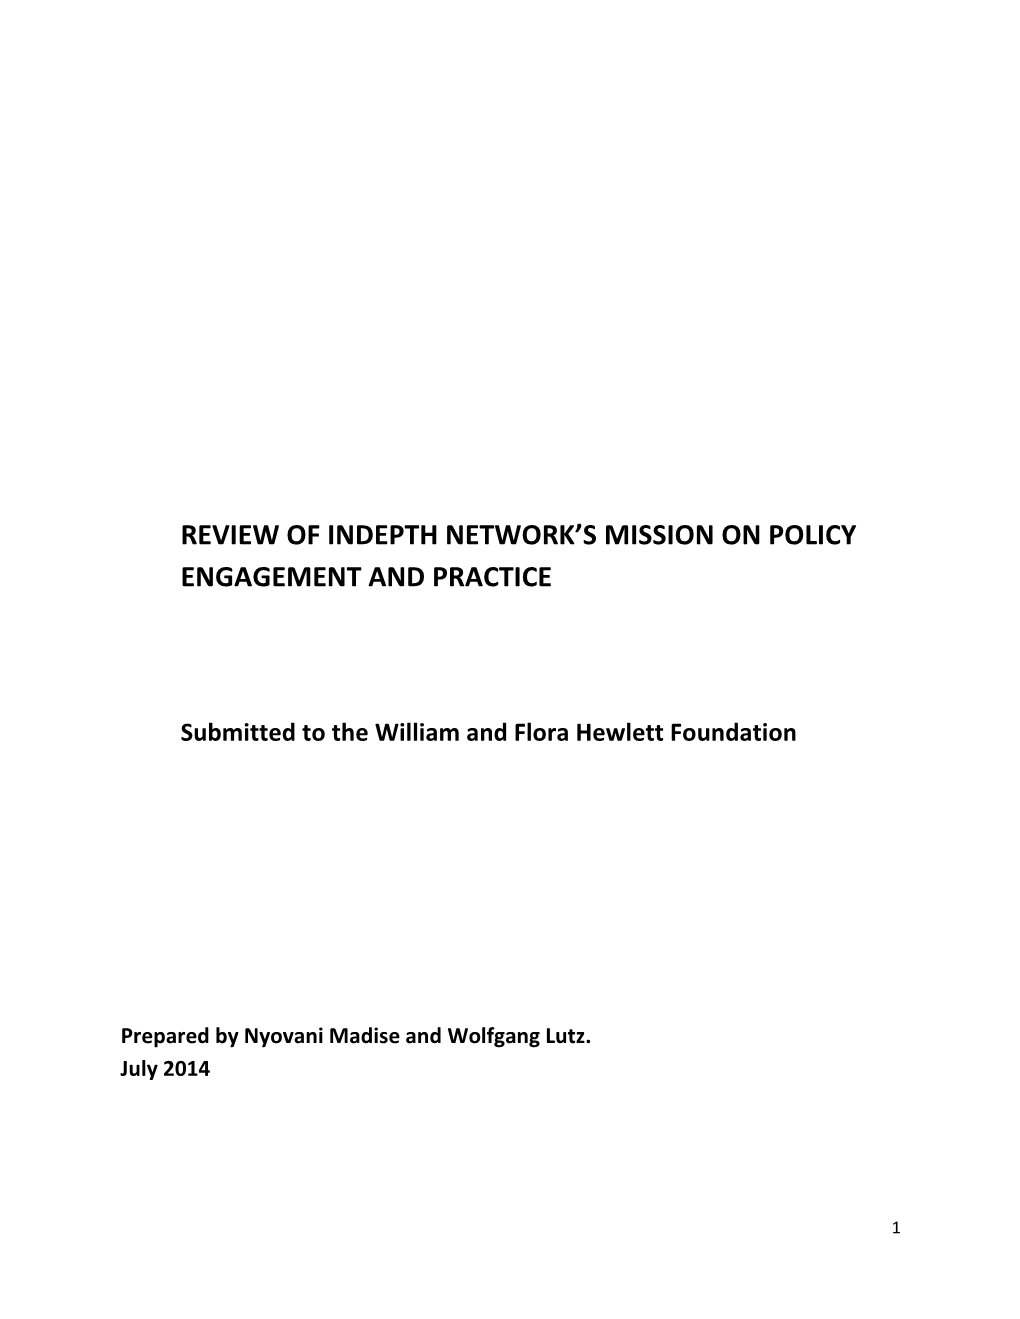 Review of INDEPTH Network's Mission on Policy Engagement And